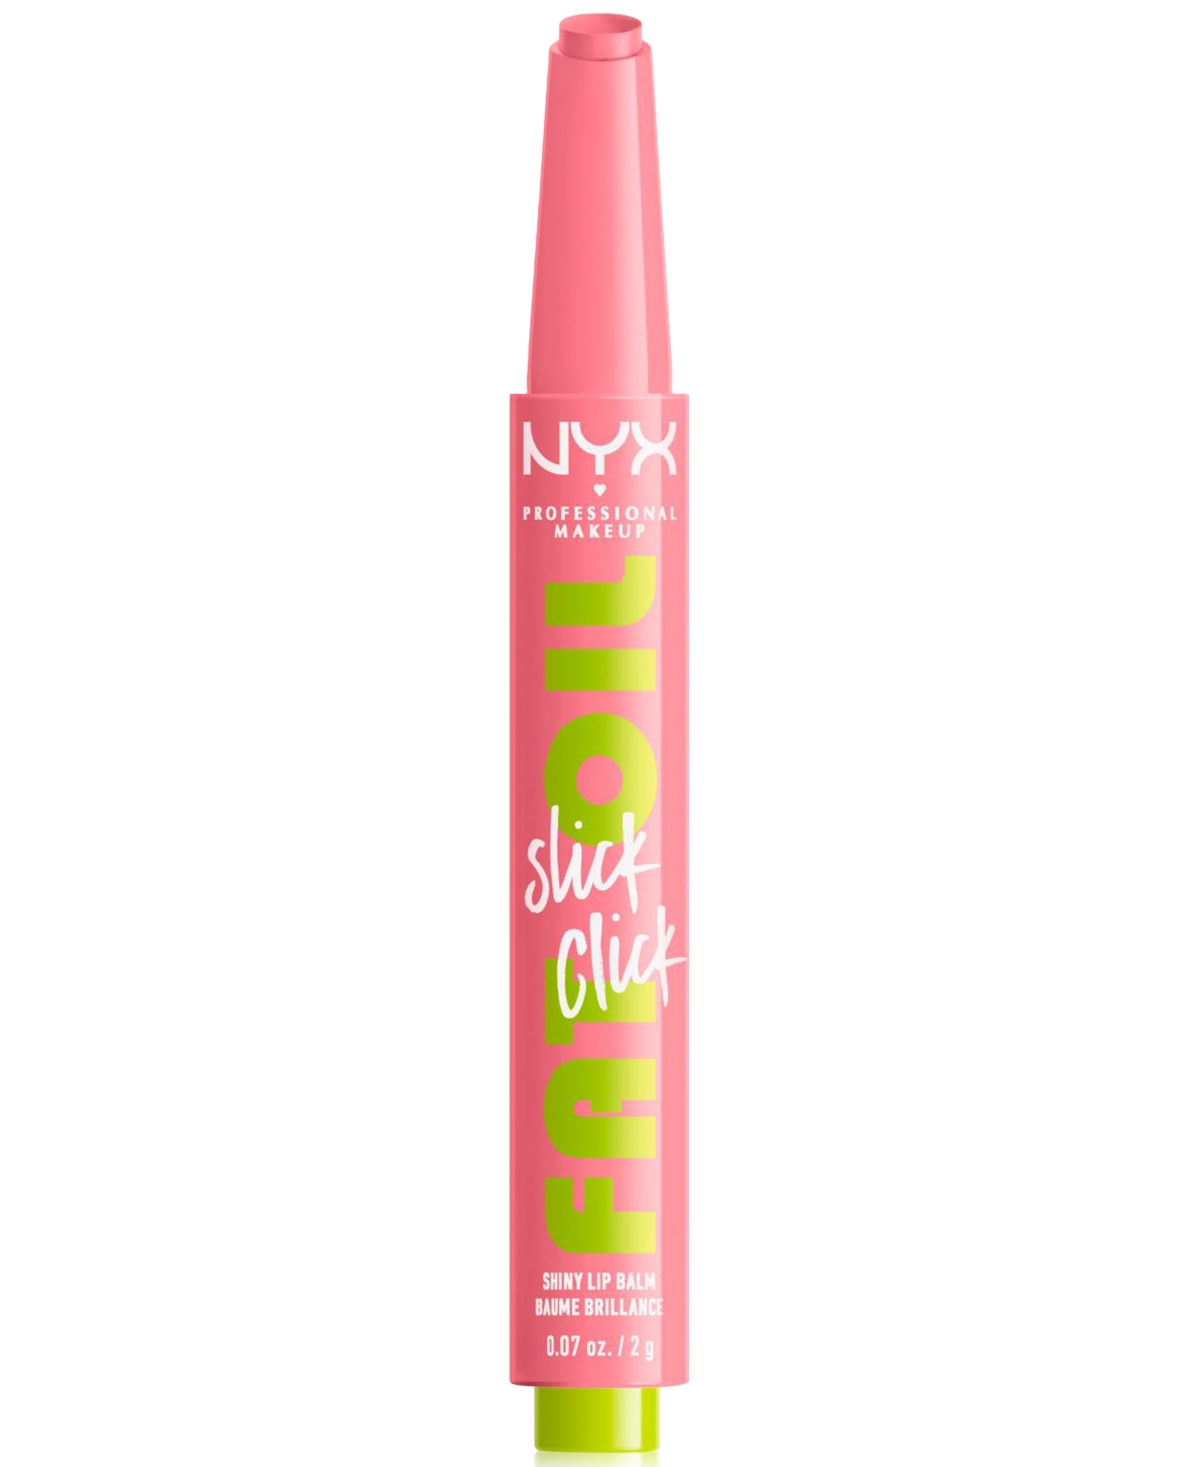 Nyx Professional Makeup Fat Oil Slick Click In Clout (soft Baby Pink)